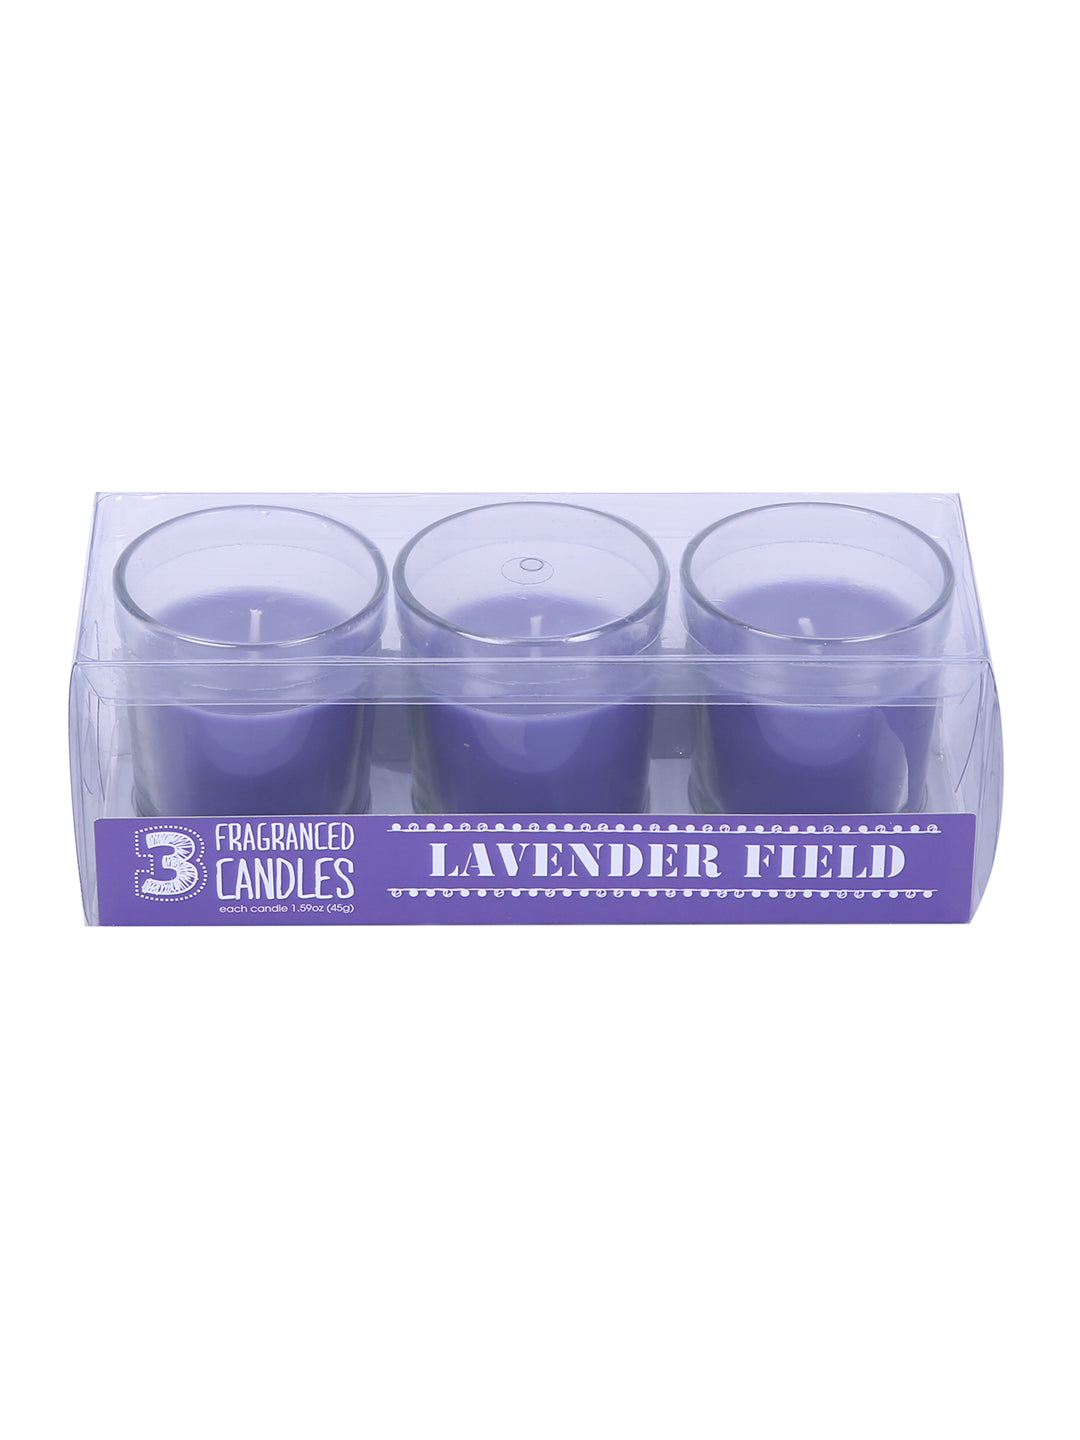 Set of 3 Hosley® Highly Fragranced Lavender Fields Filled Glass Candles, 1.6 Oz wax each